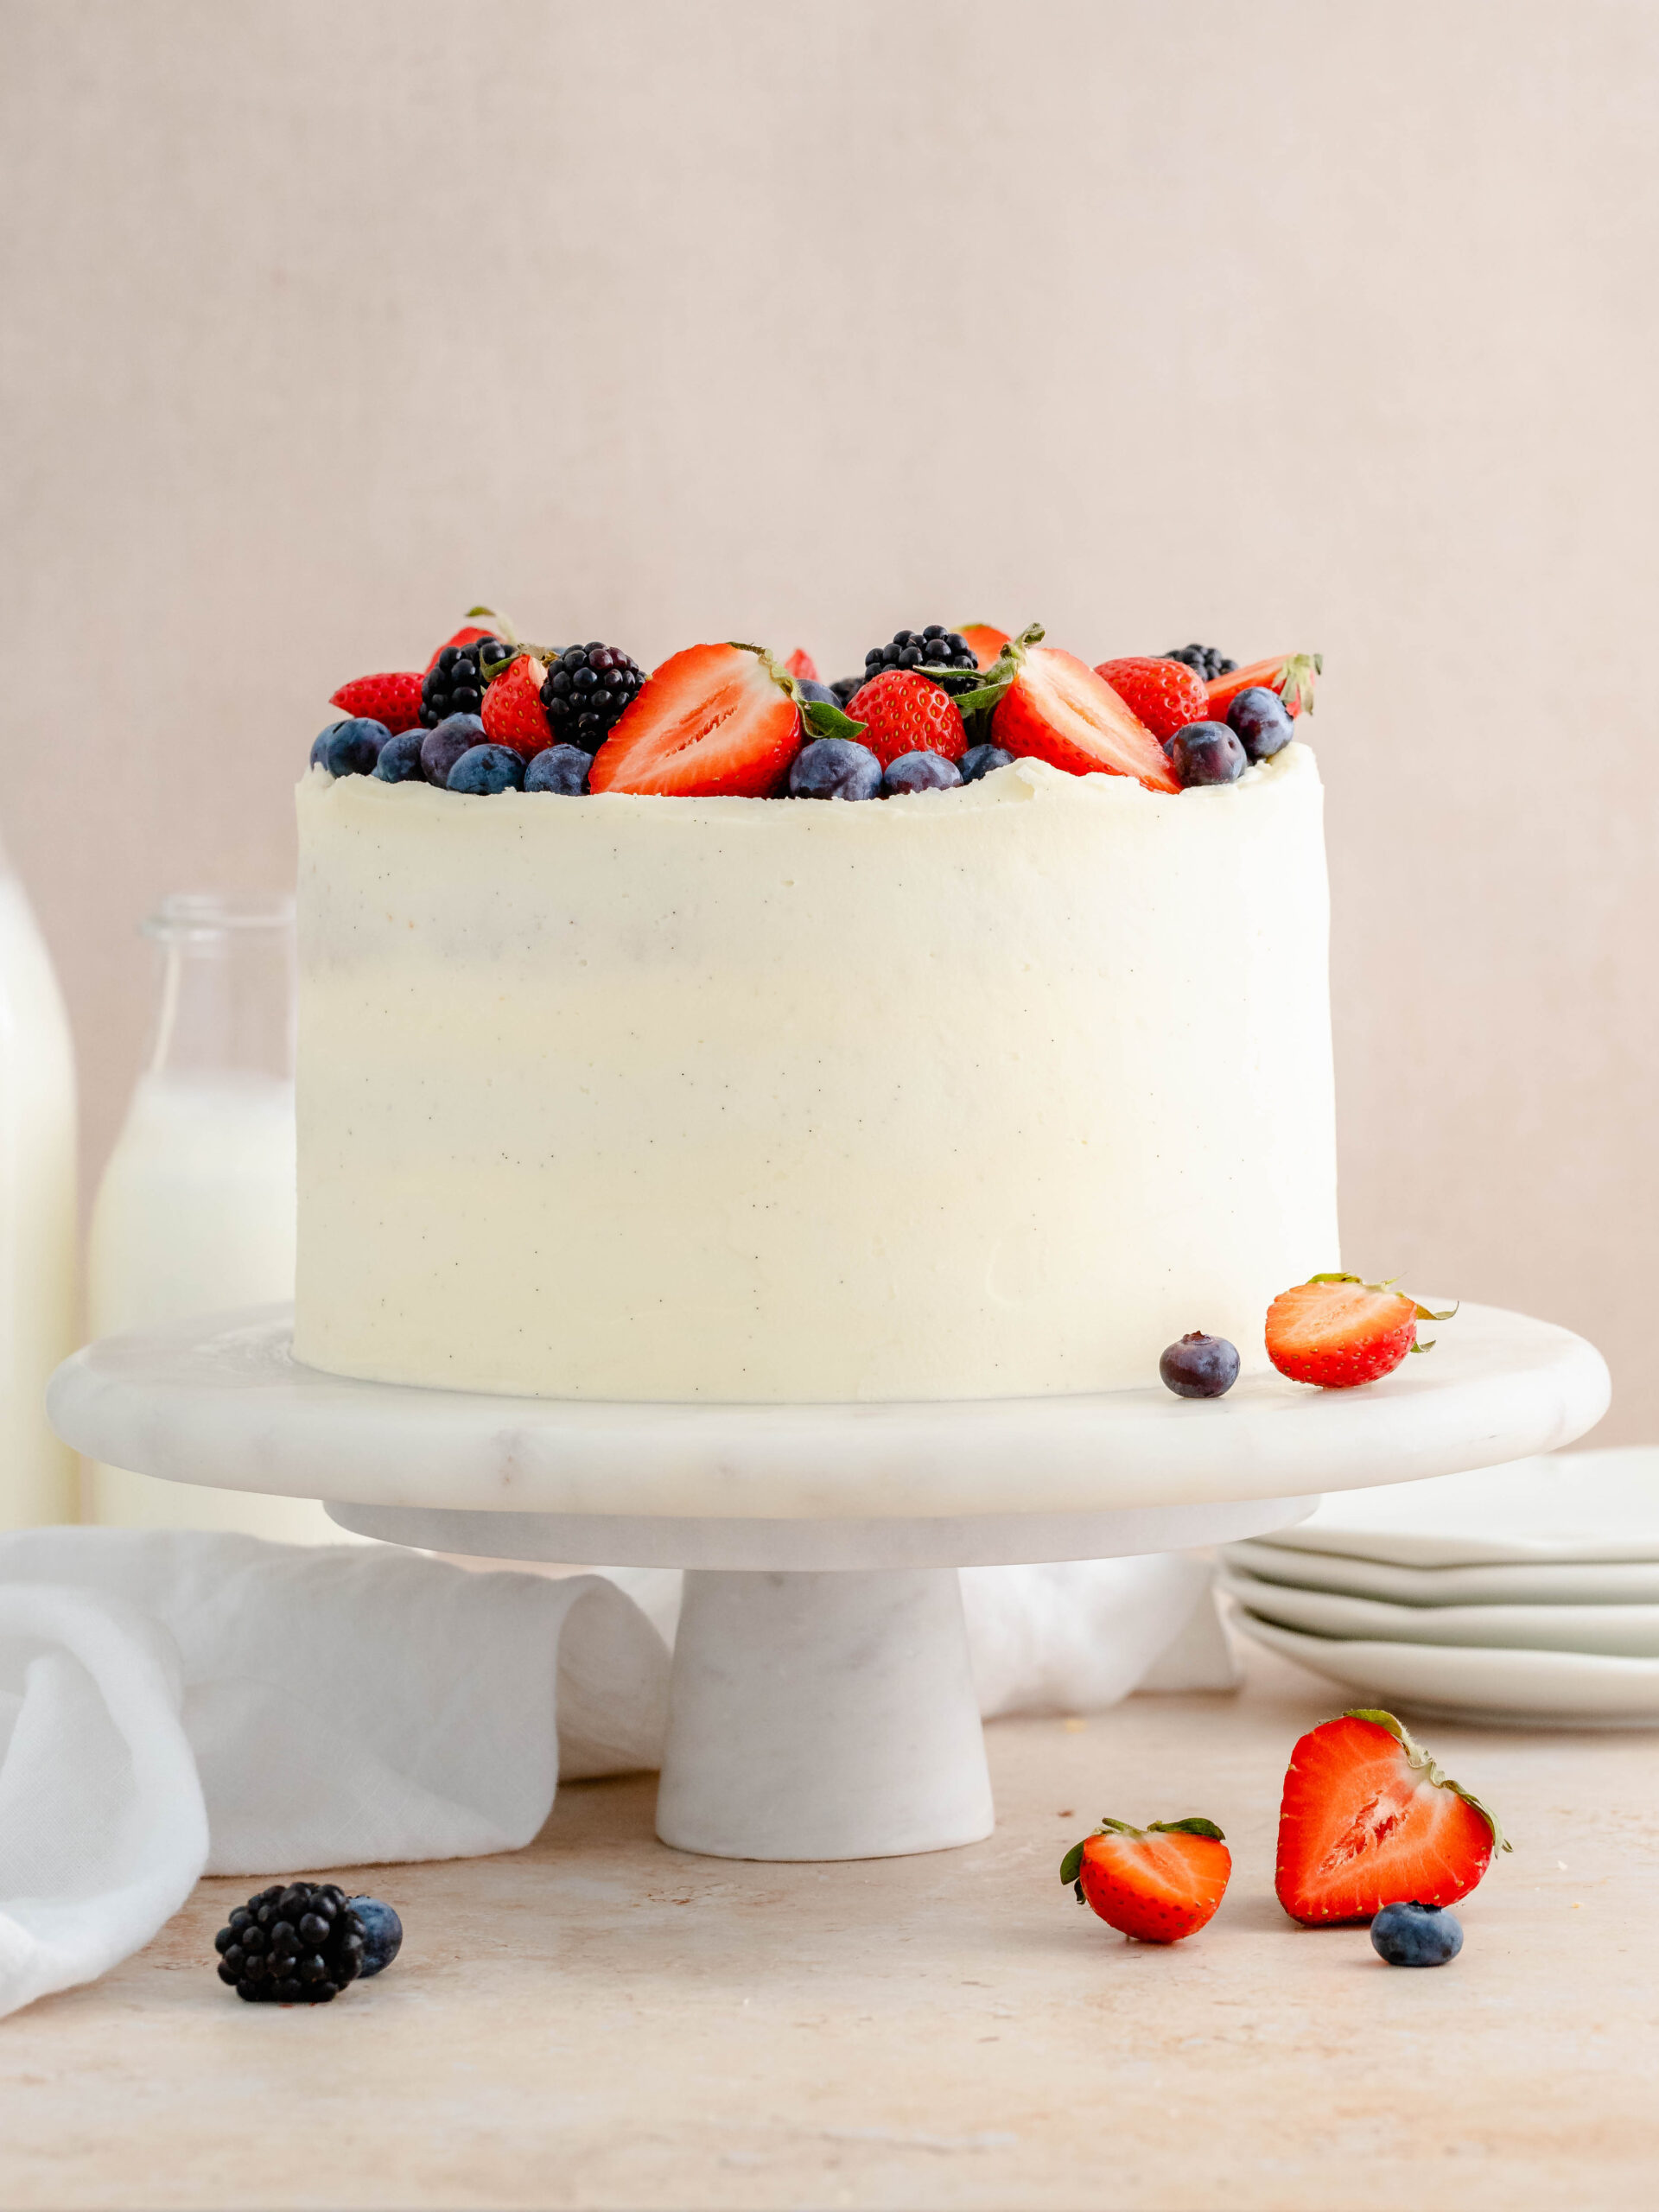 Strawberry and blueberry layer cake